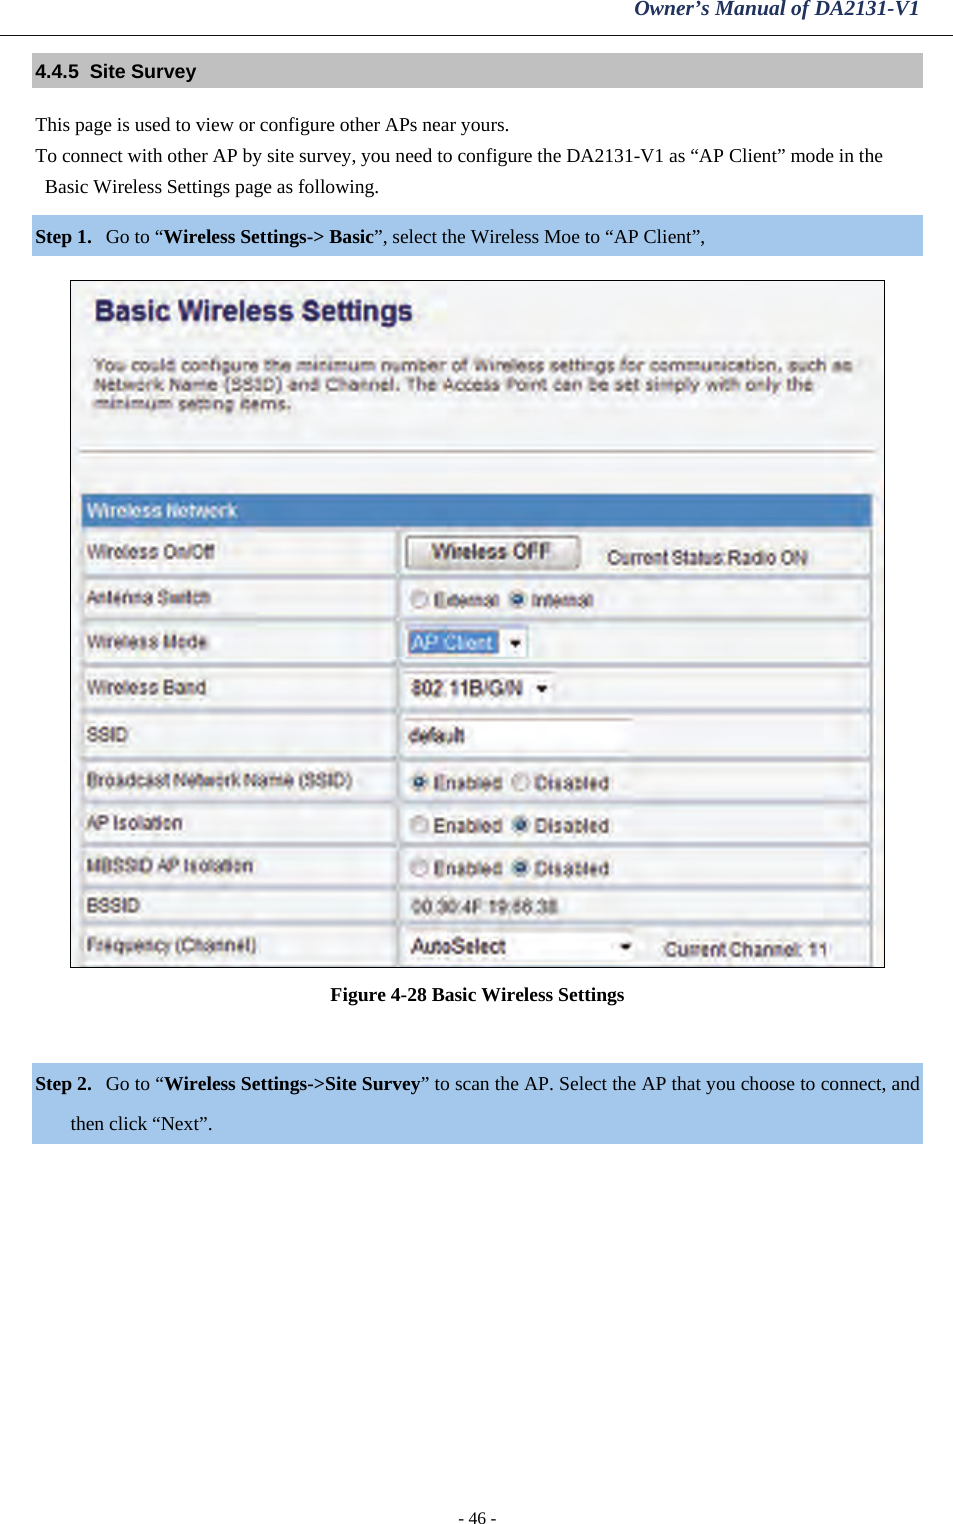 Owner’s Manual of DA2131-V1 - 46 - 4.4.5  Site Survey This page is used to view or configure other APs near yours. To connect with other AP by site survey, you need to configure the DA2131-V1 as “AP Client” mode in the Basic Wireless Settings page as following. Step 1. Go to “Wireless Settings-&gt; Basic”, select the Wireless Moe to “AP Client”,   Figure 4-28 Basic Wireless Settings  Step 2. Go to “Wireless Settings-&gt;Site Survey” to scan the AP. Select the AP that you choose to connect, and then click “Next”. 